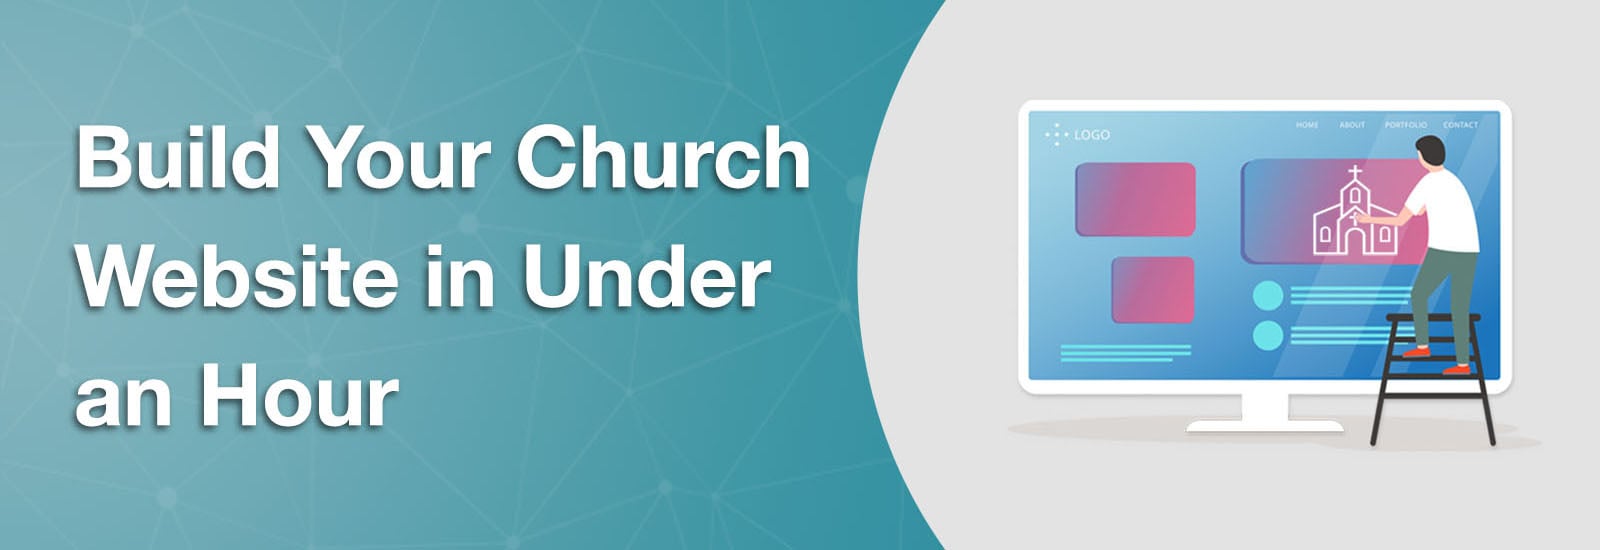 Build Your Church Website in Under an Hour